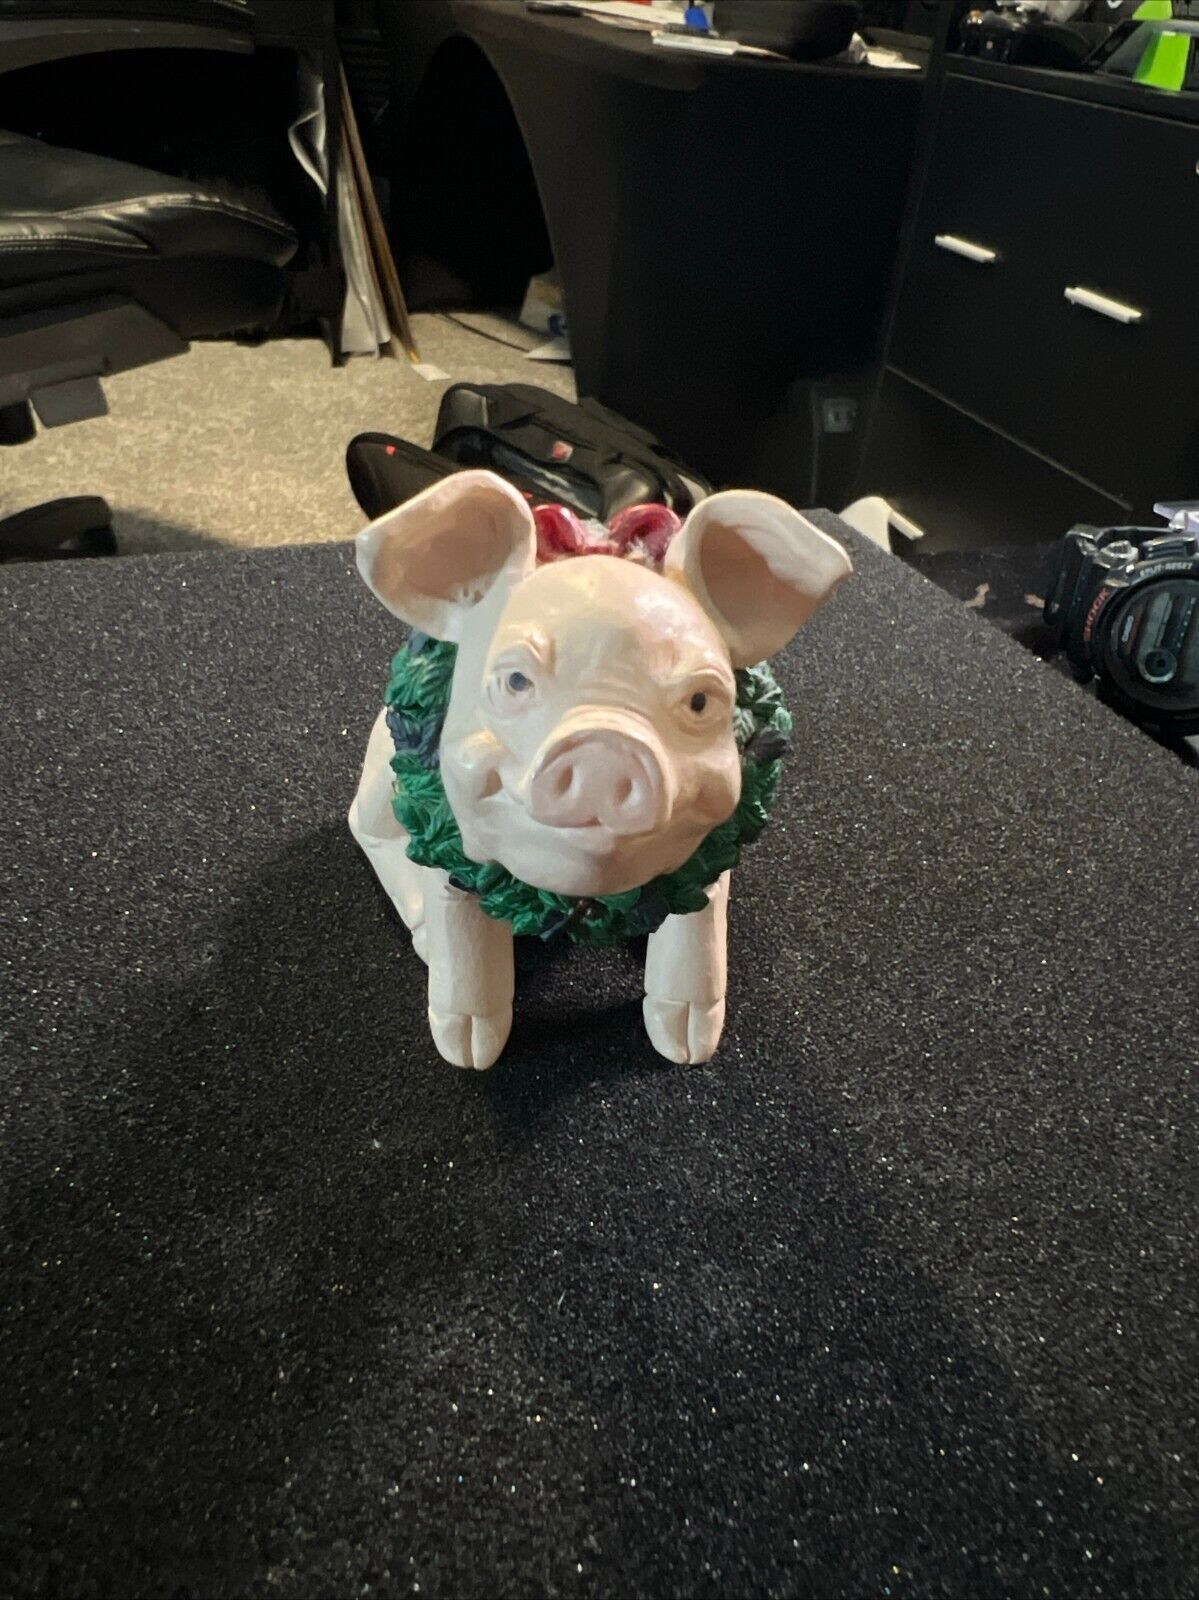 1992 ENESCO KATHY WISE PIG FIGURINE VINTAGE MADE IN CHINA